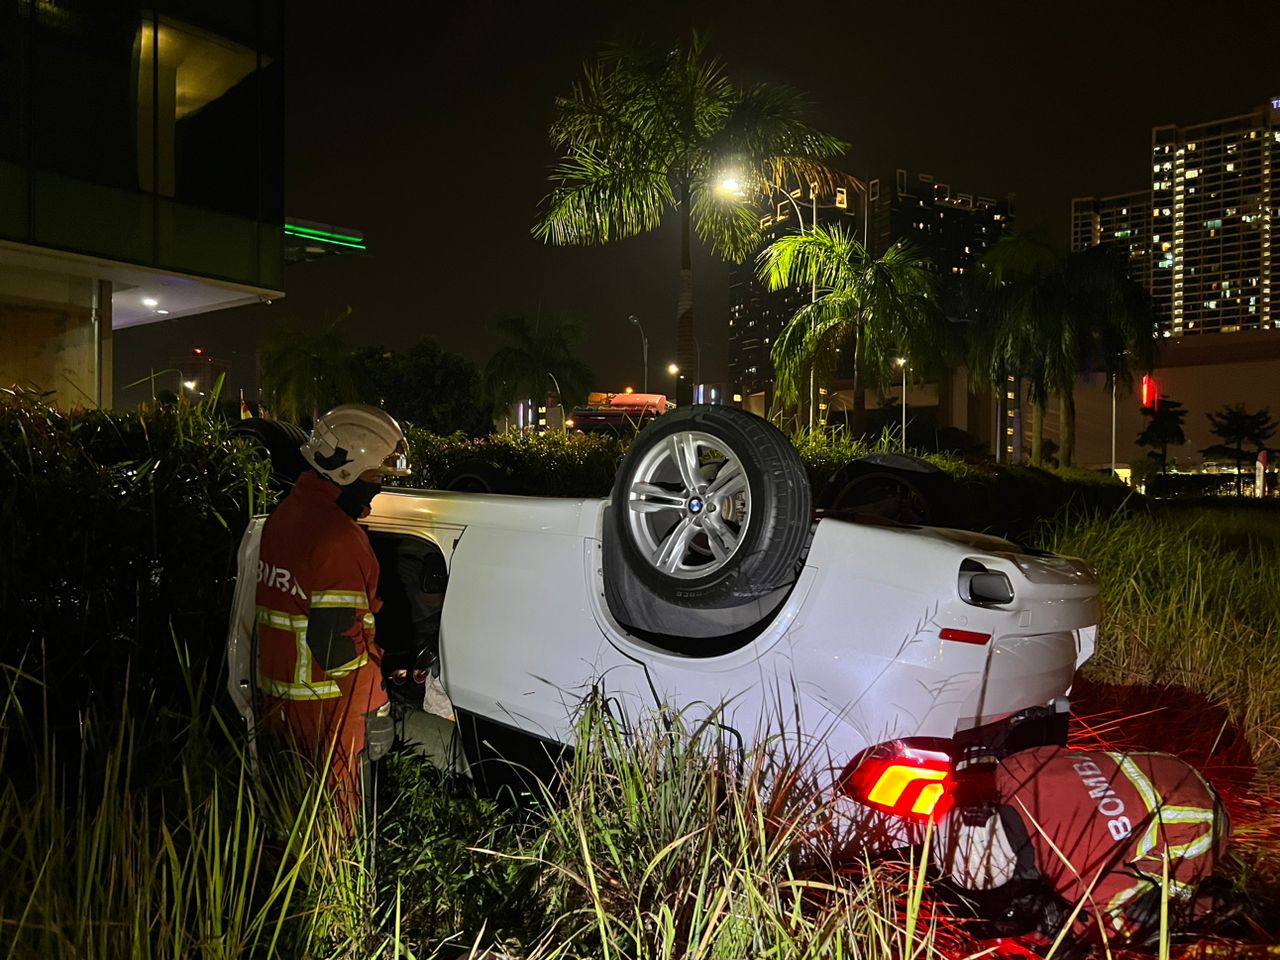 Bmw falls at grassy area after falling off 2nd floor